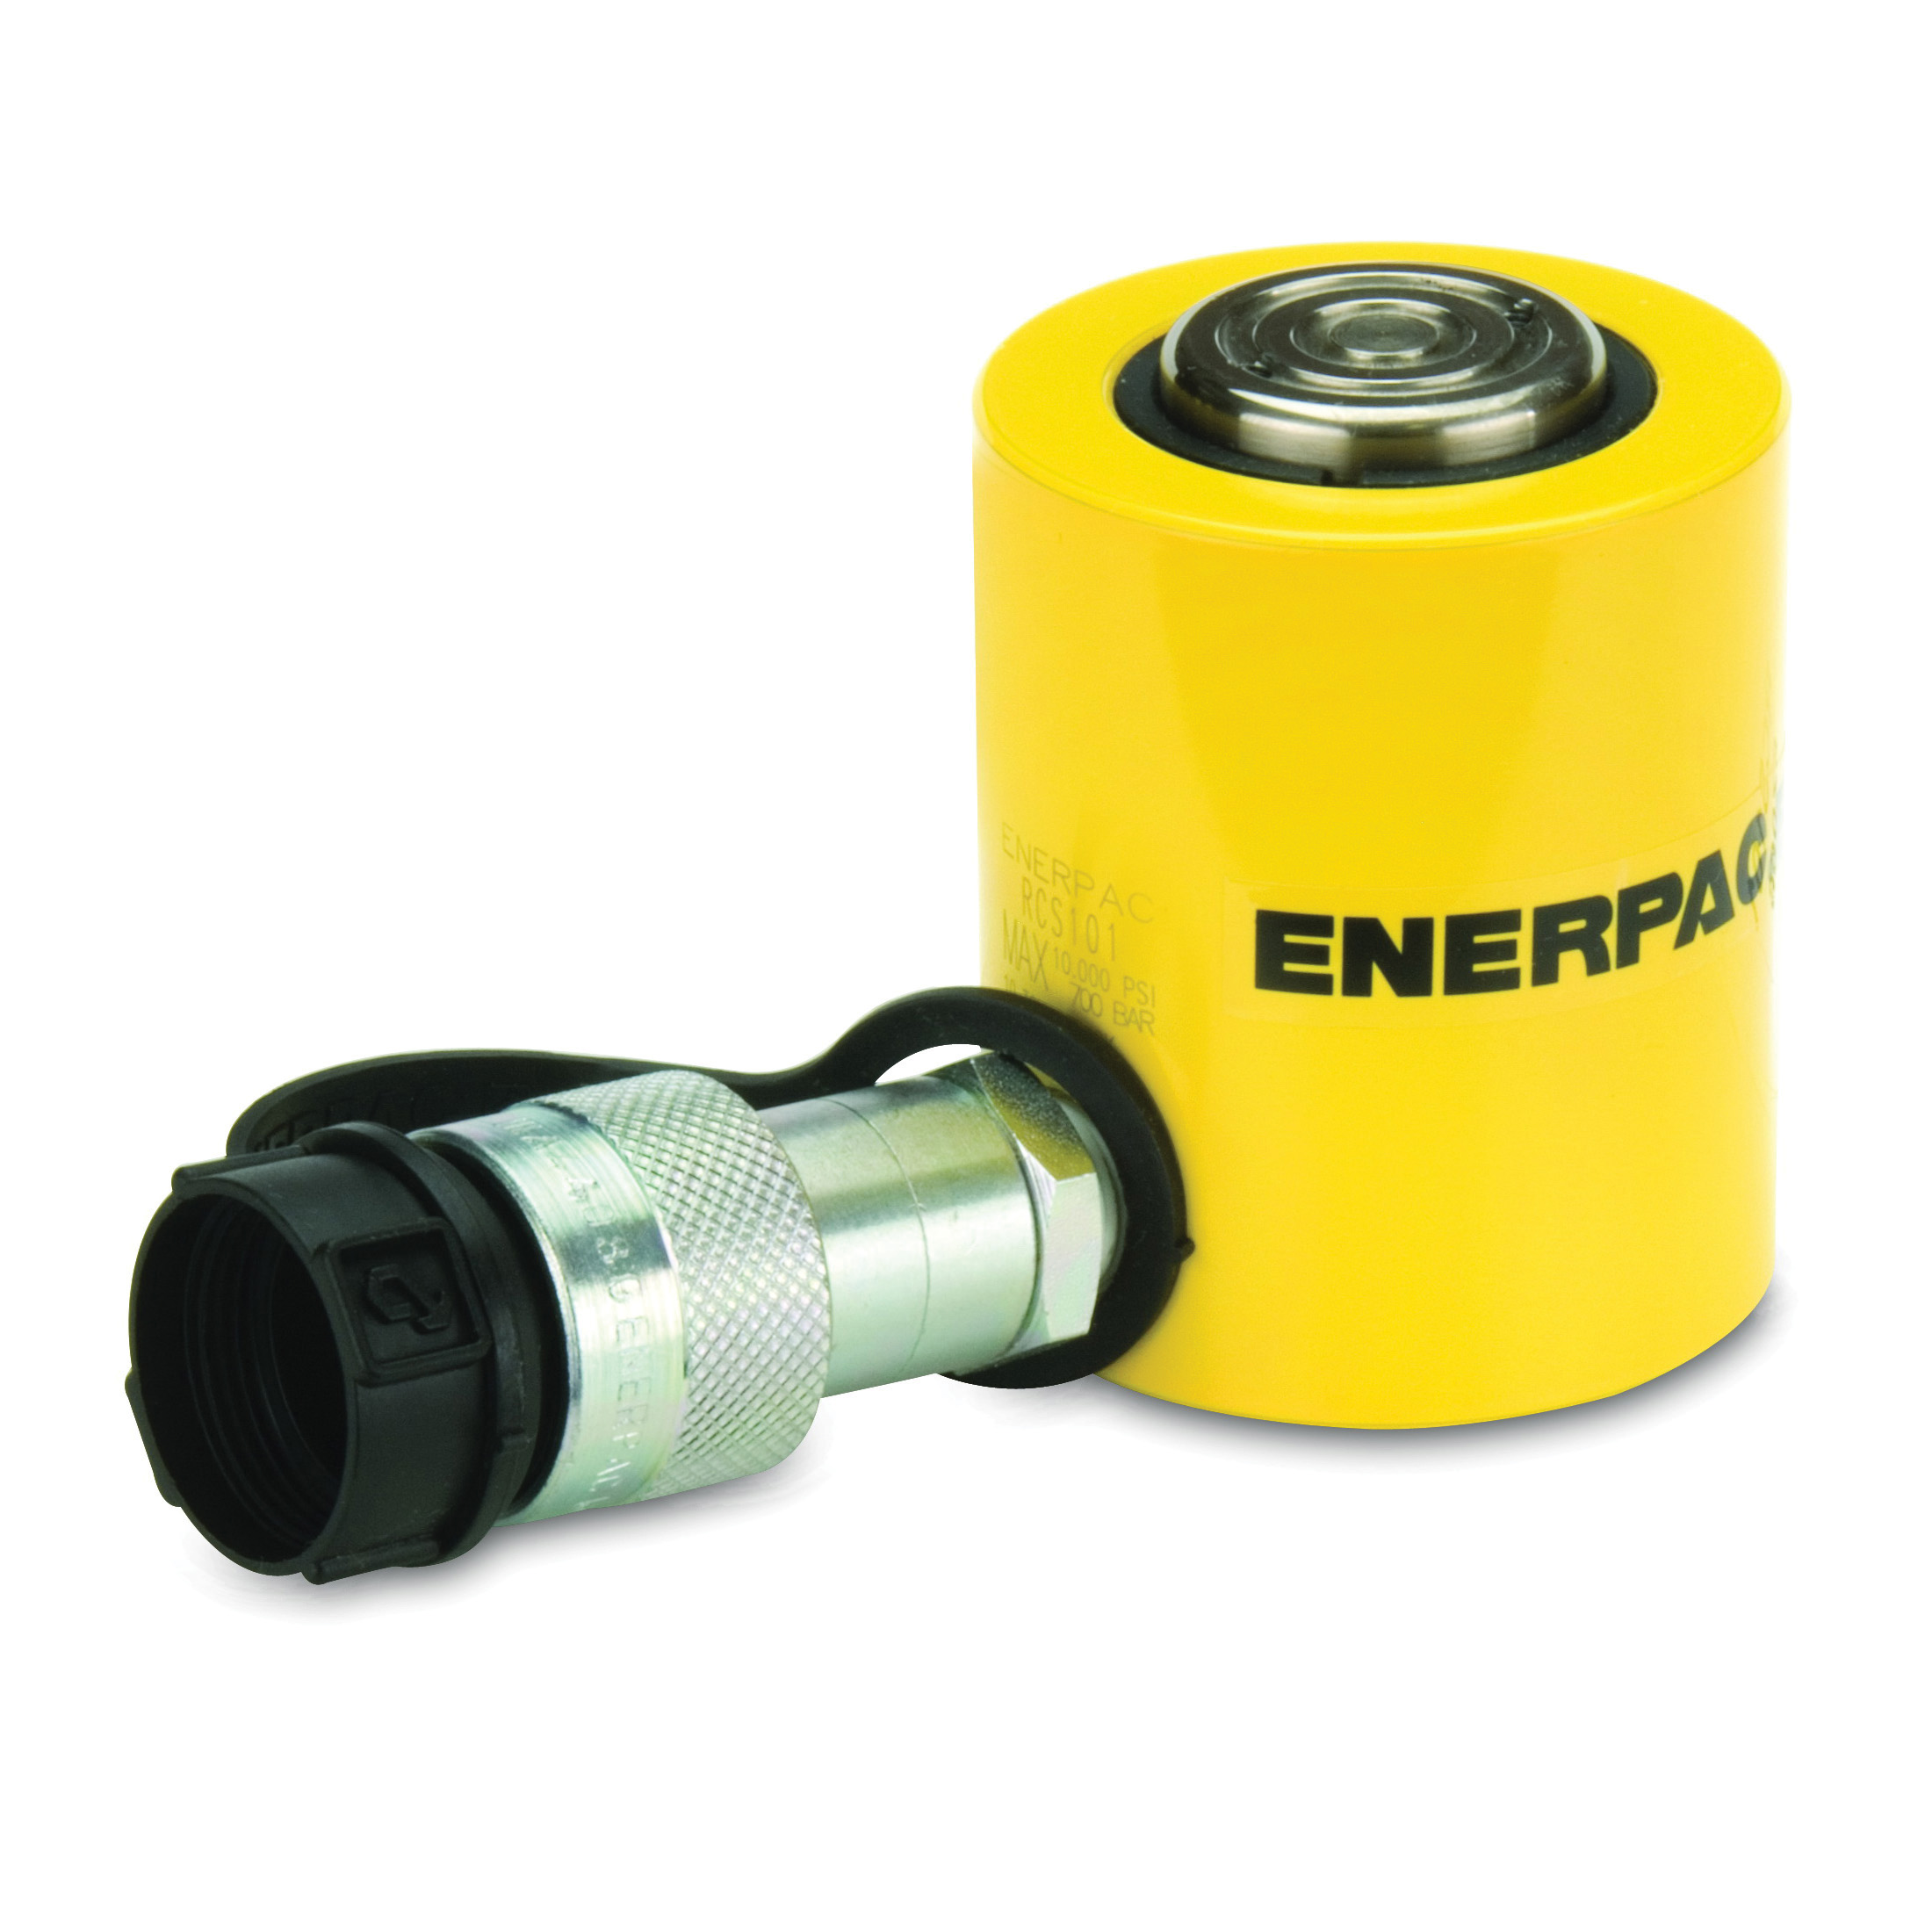 Enerpac® RC-104 DUO General Purpose Single Acting Hydraulic Cylinder, 10 ton Capacity, 1.69 in Dia Bore, 4.13 in L Stroke, 6-3/4 in H Retract, 1-1/2 in Dia Rod, 700 bar